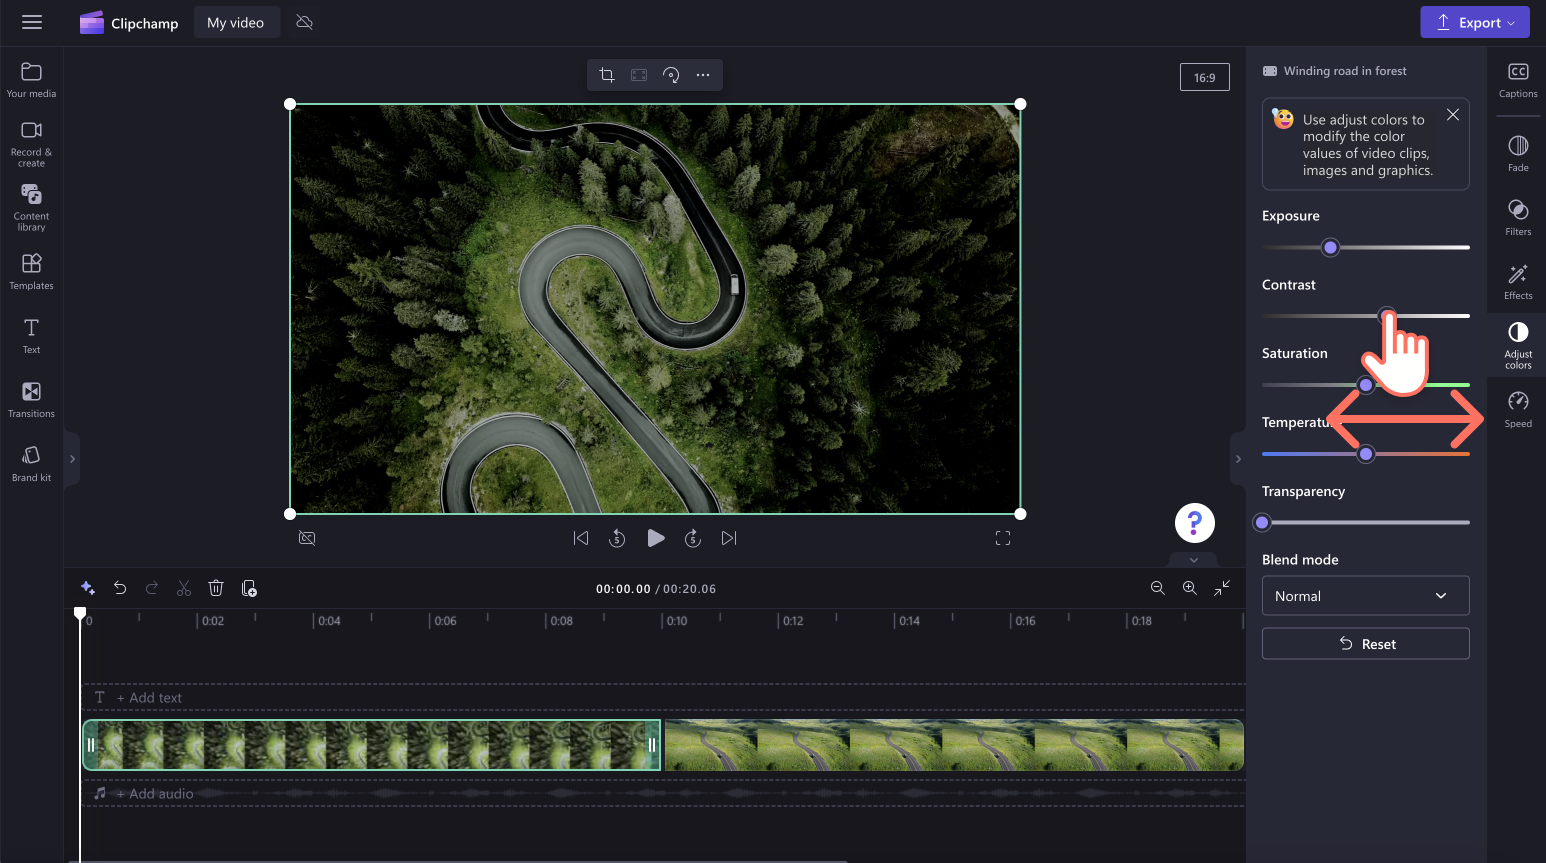 An image of a user editing the color of a video using the slider.